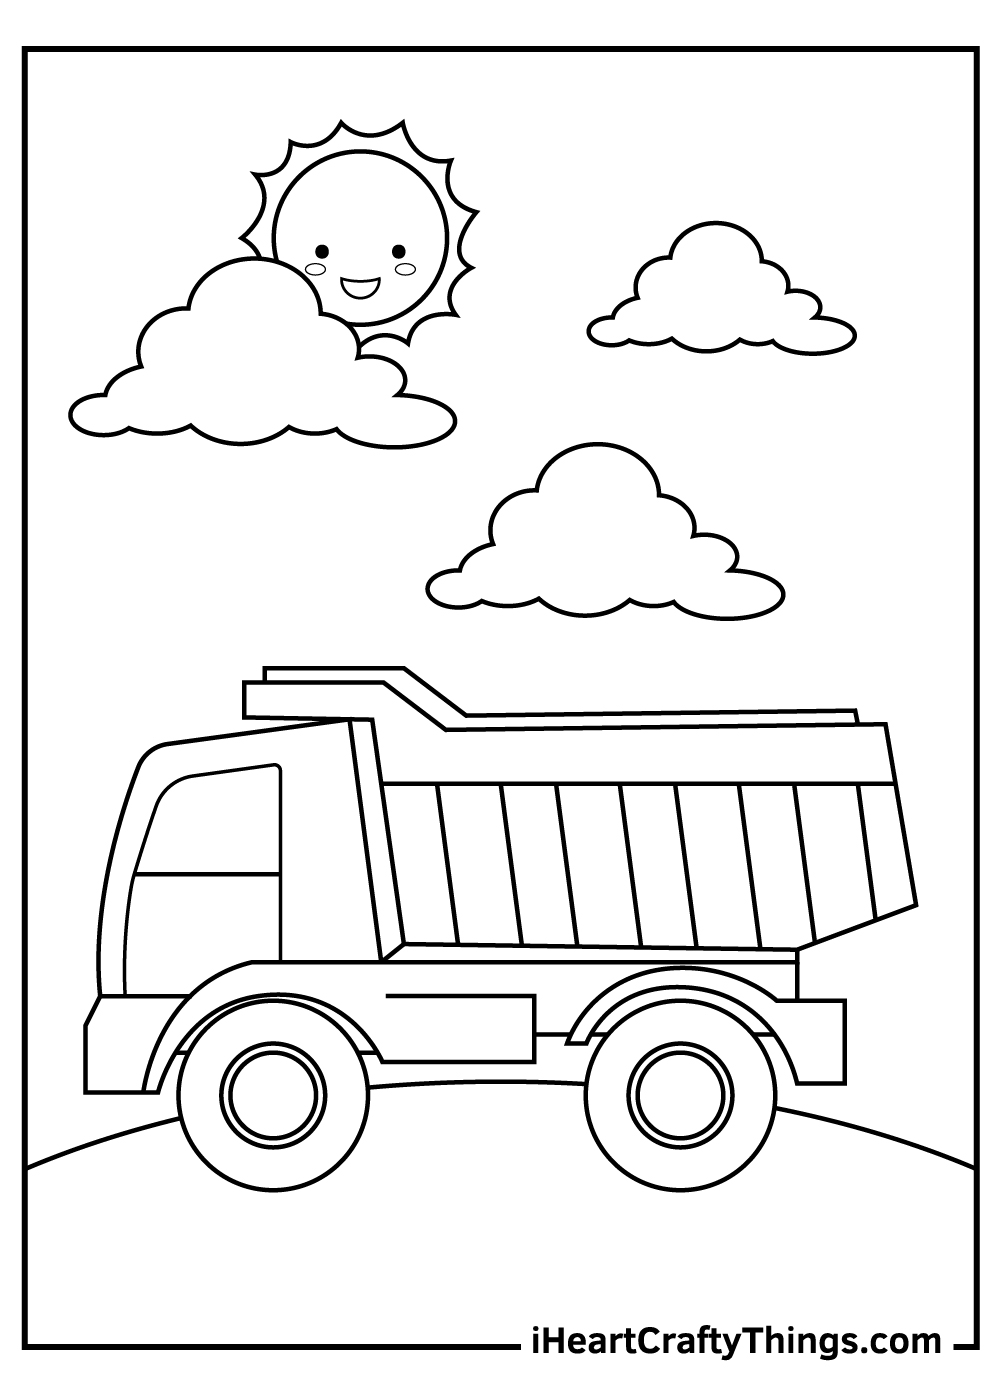 Truck coloring pages free printables